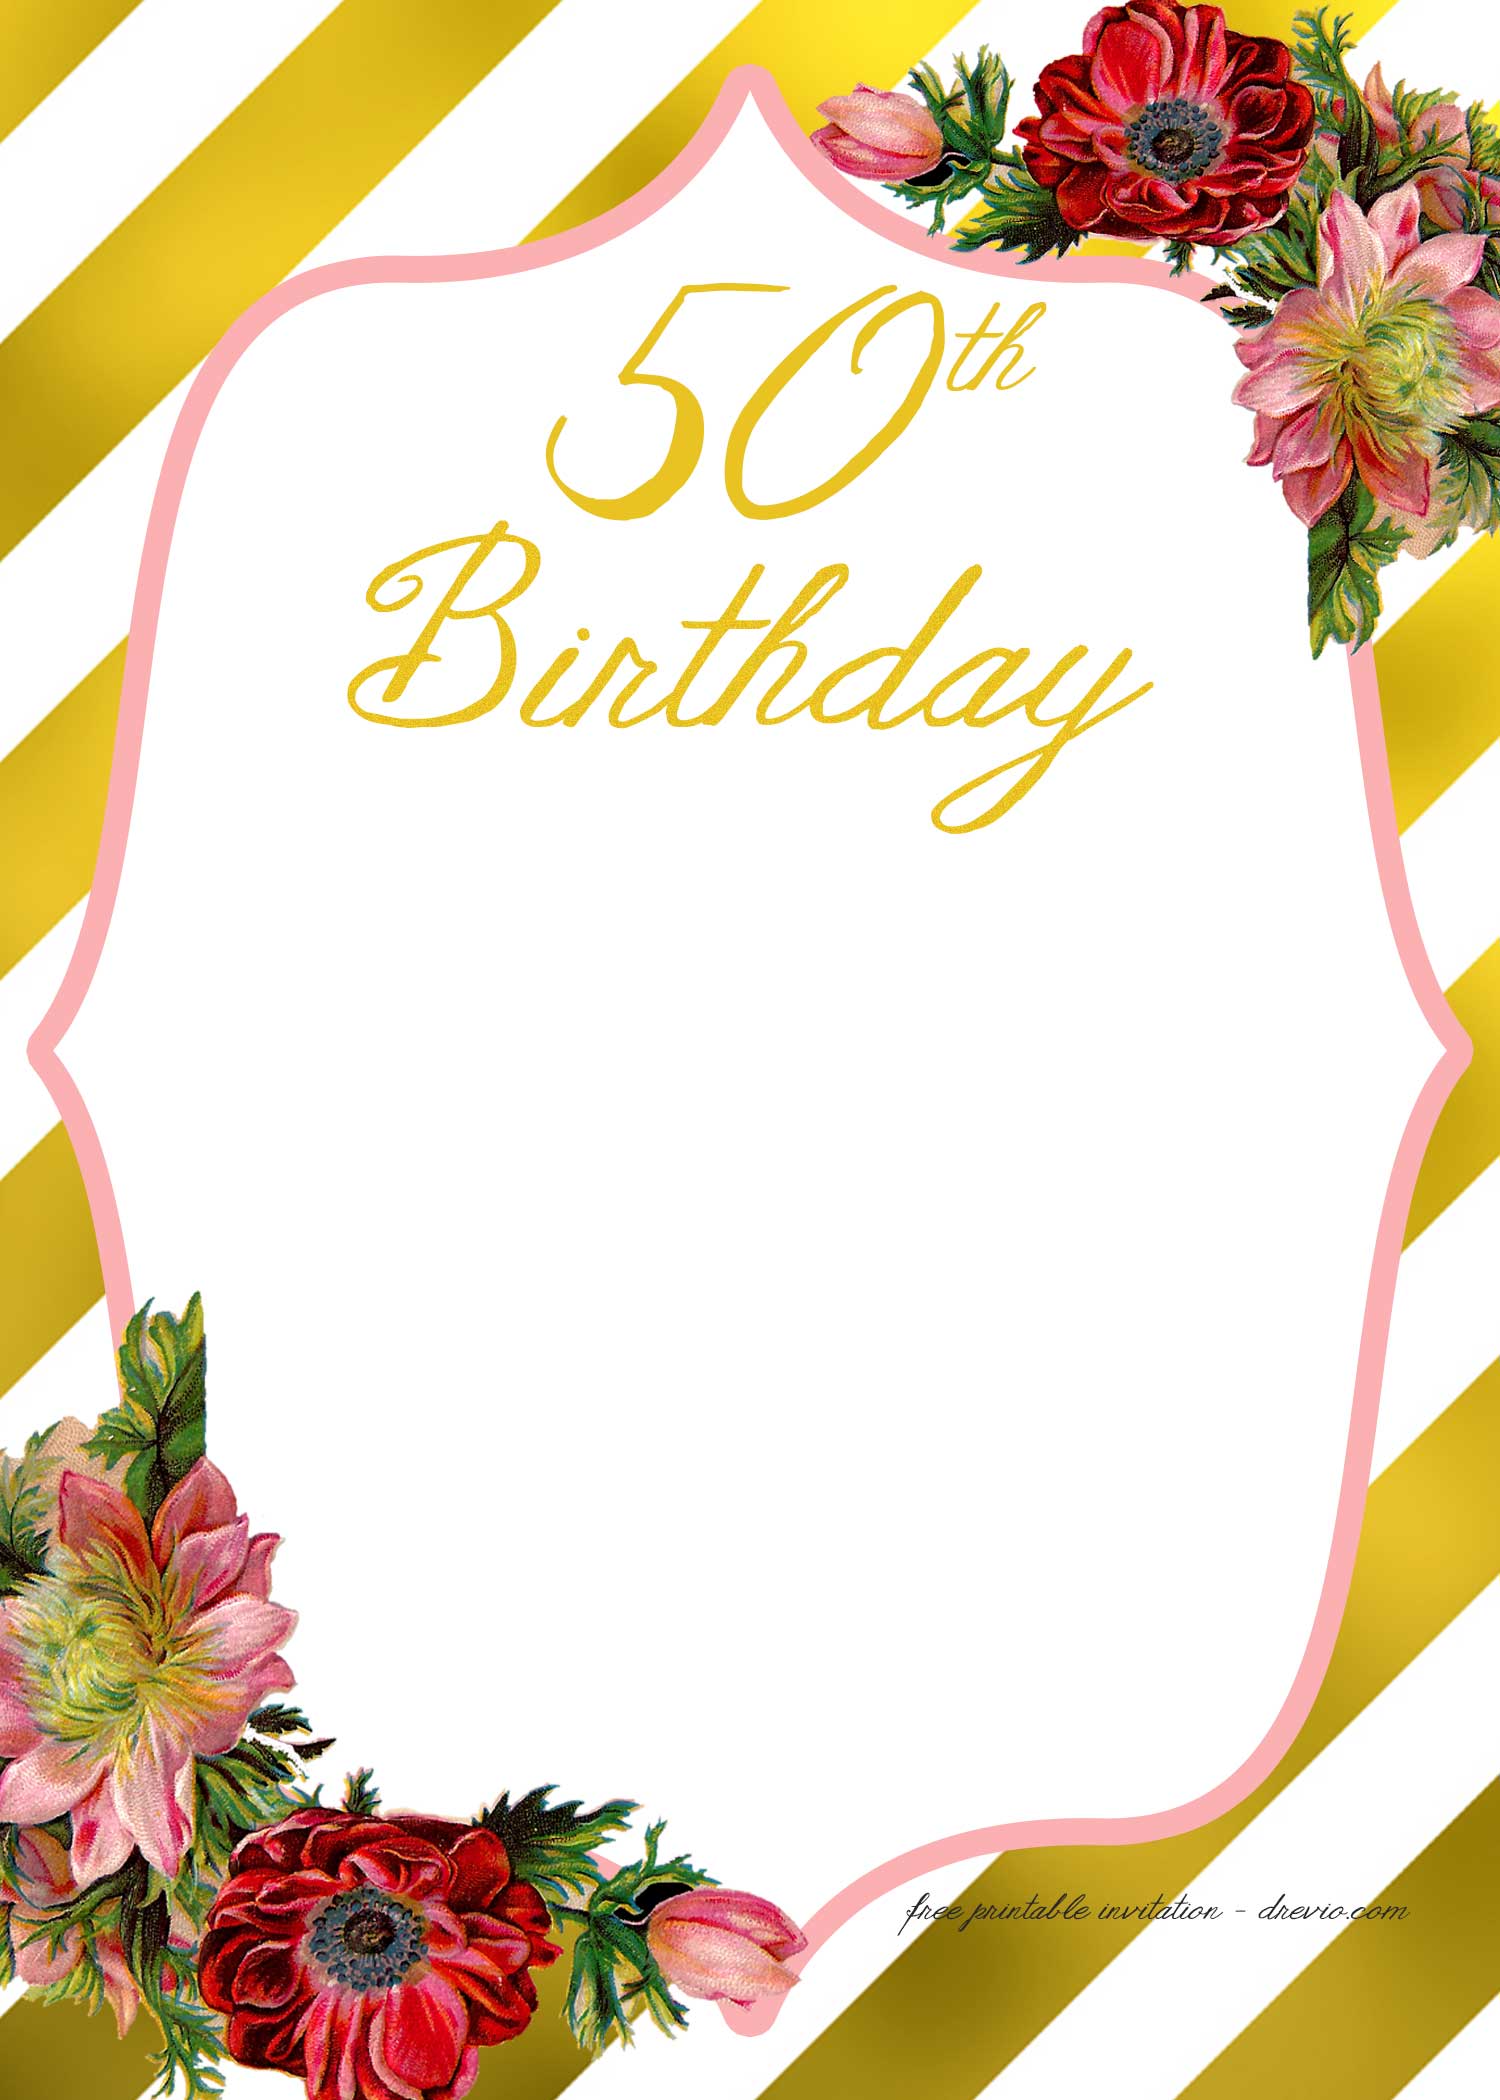 Adult Birthday Invitations Template - for 50th years old and up! | DREVIO